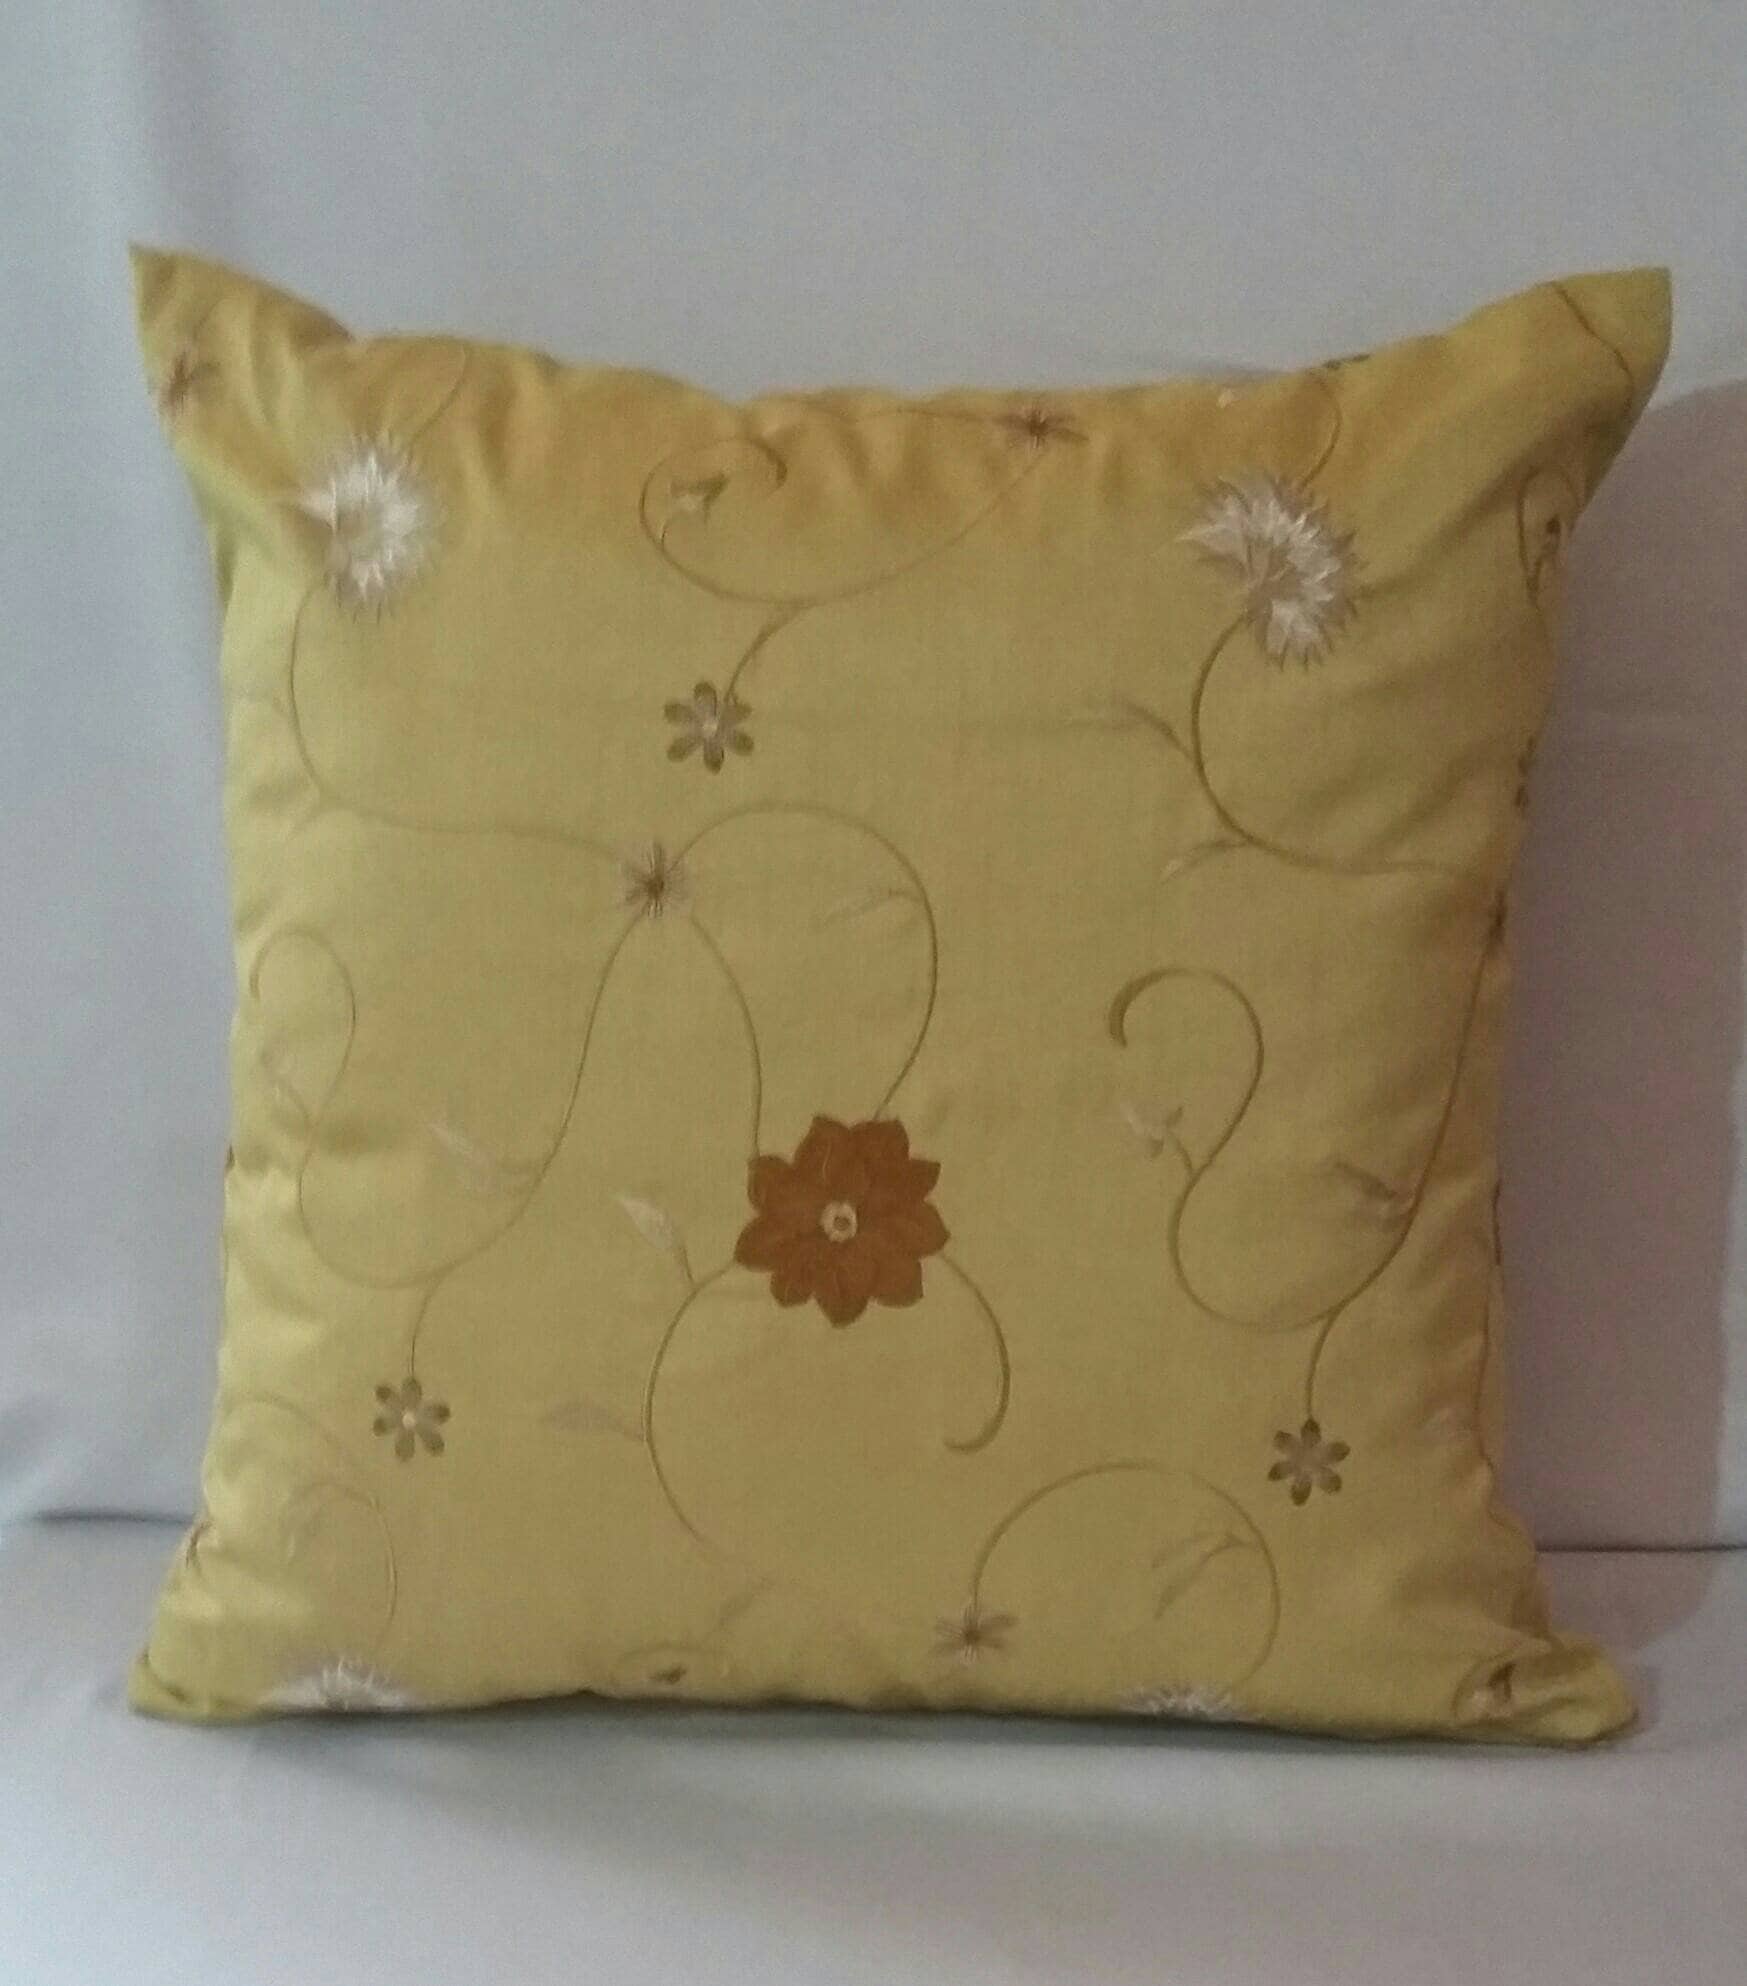 glazed linen throw pillow Shiny sammer pillow Metallic off white cotton cushion cover On sale Decorative cushion cover 30% off